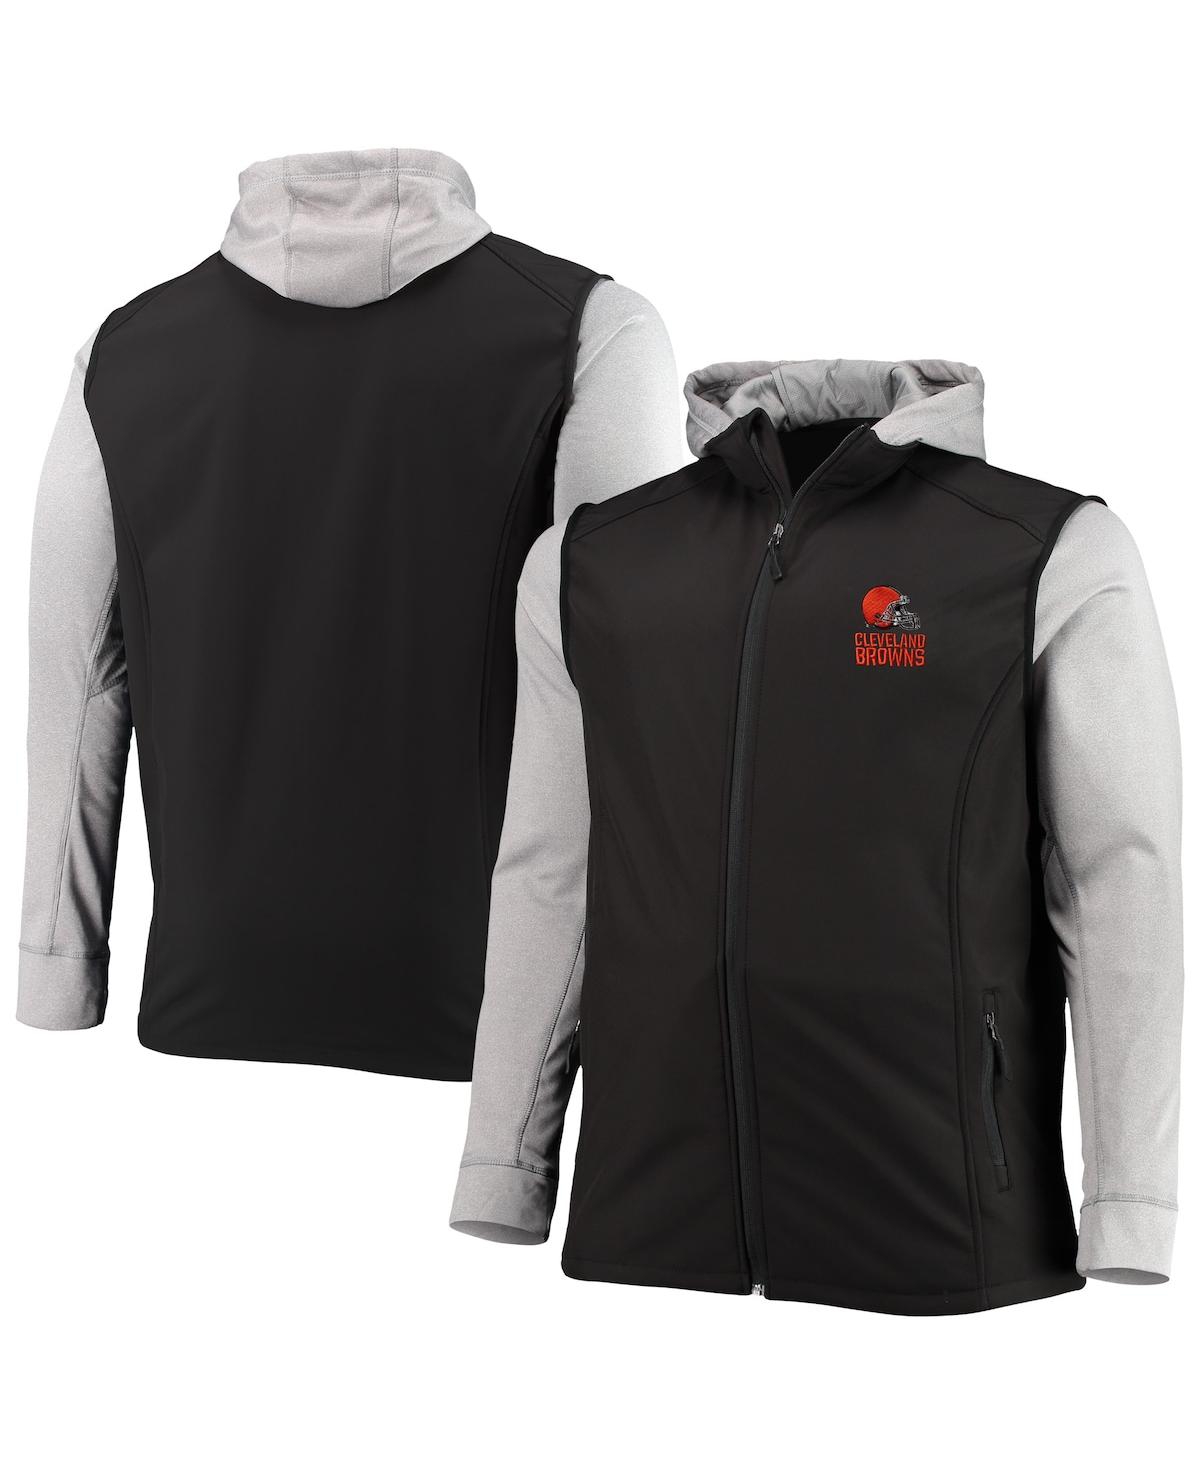 Men's Dunbrooke Black and Gray Cleveland Browns Big and Tall Alpha Full-Zip Hoodie Jacket - Black, Gray